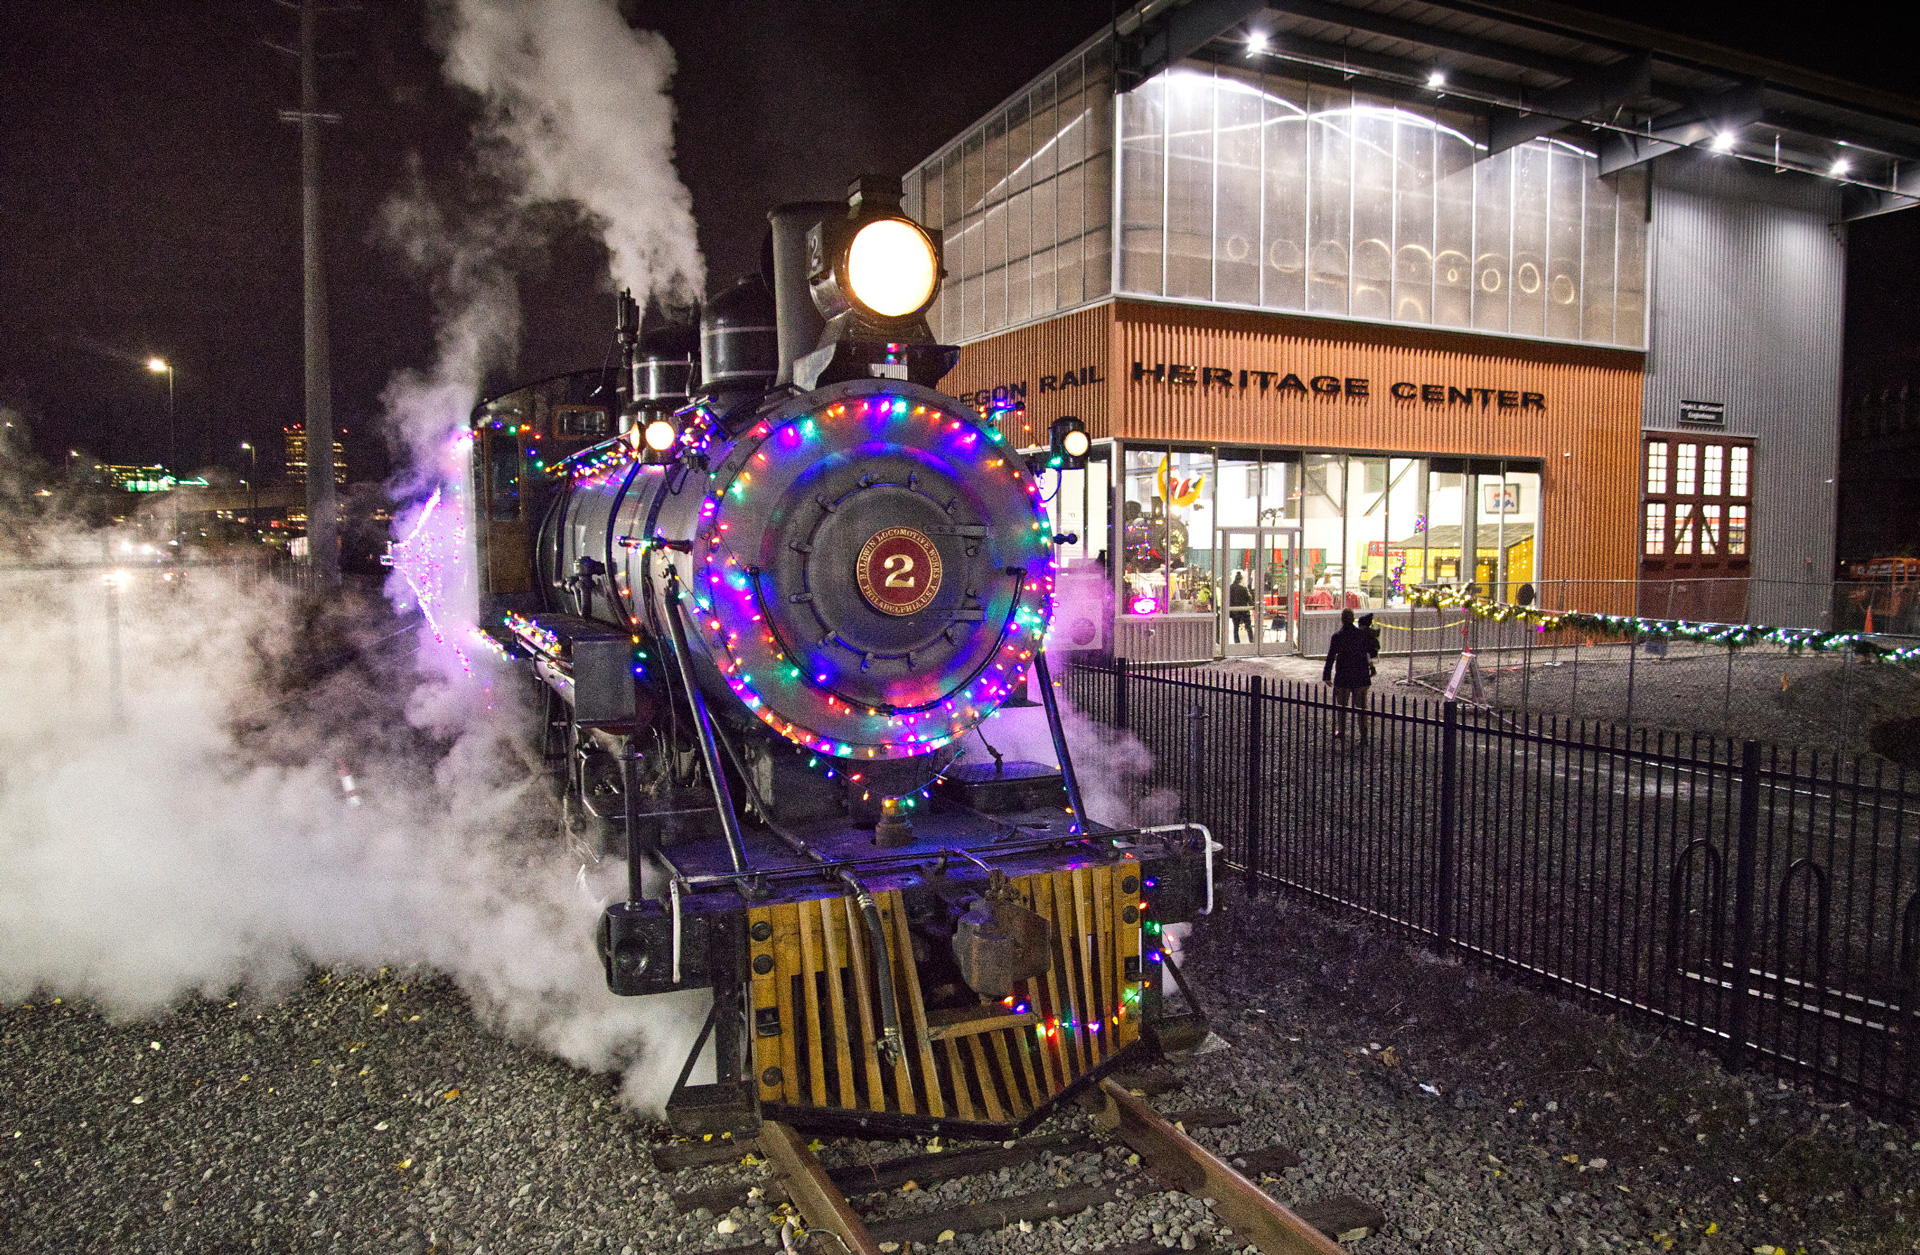 The Holiday Express train at night with festive lights on it and steam coming out of it.